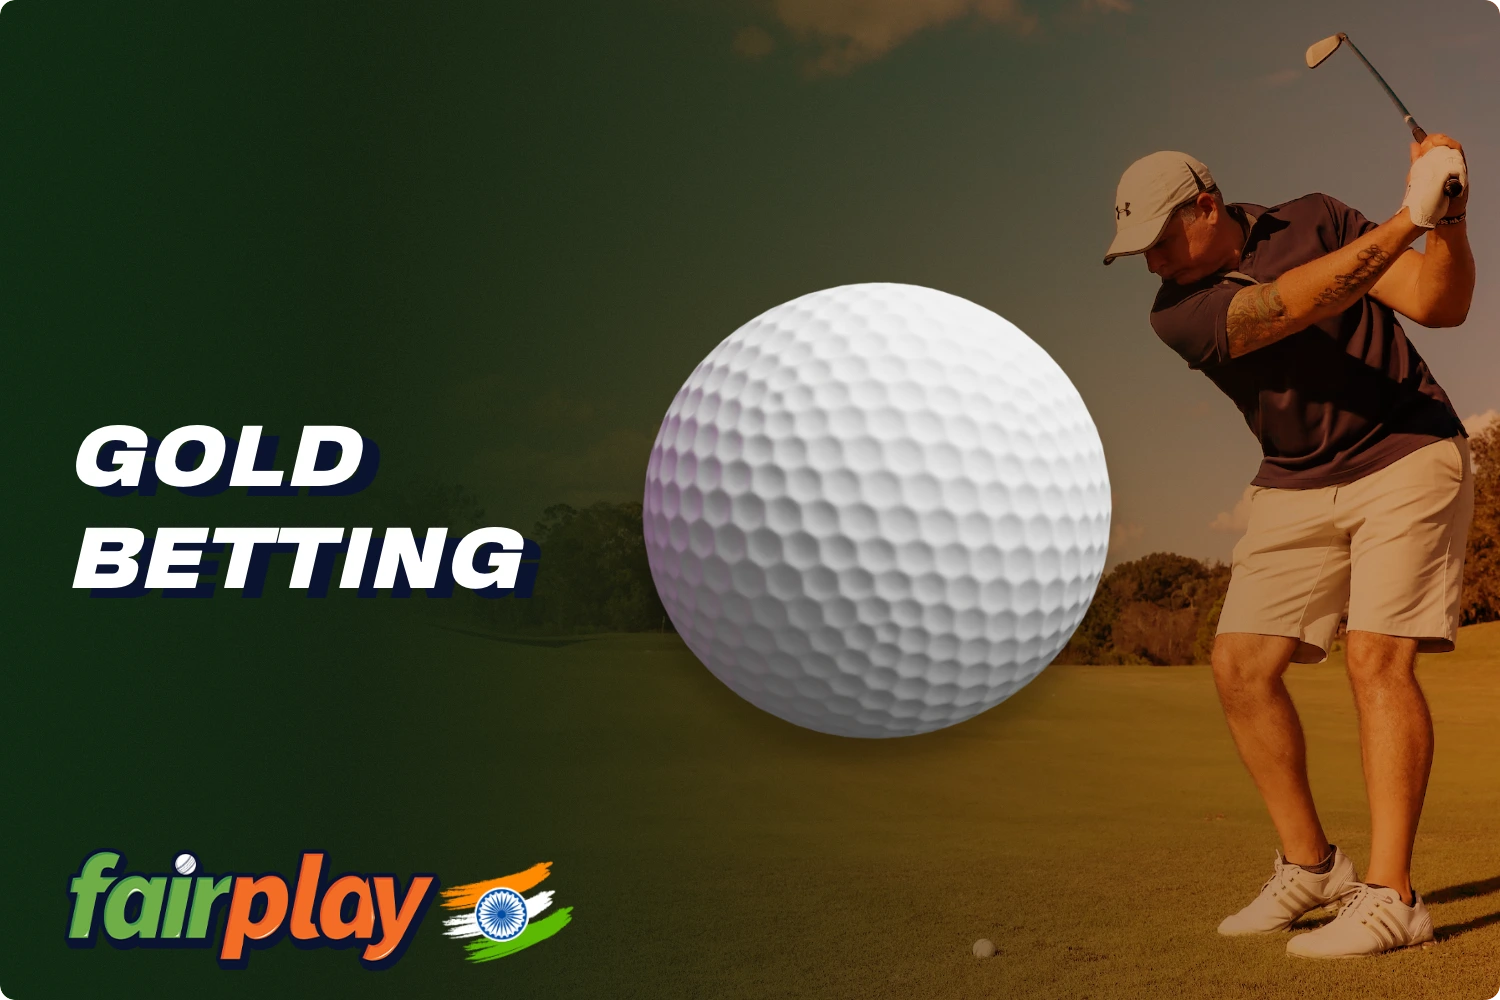 Golf betting is available to Fairplay users from India